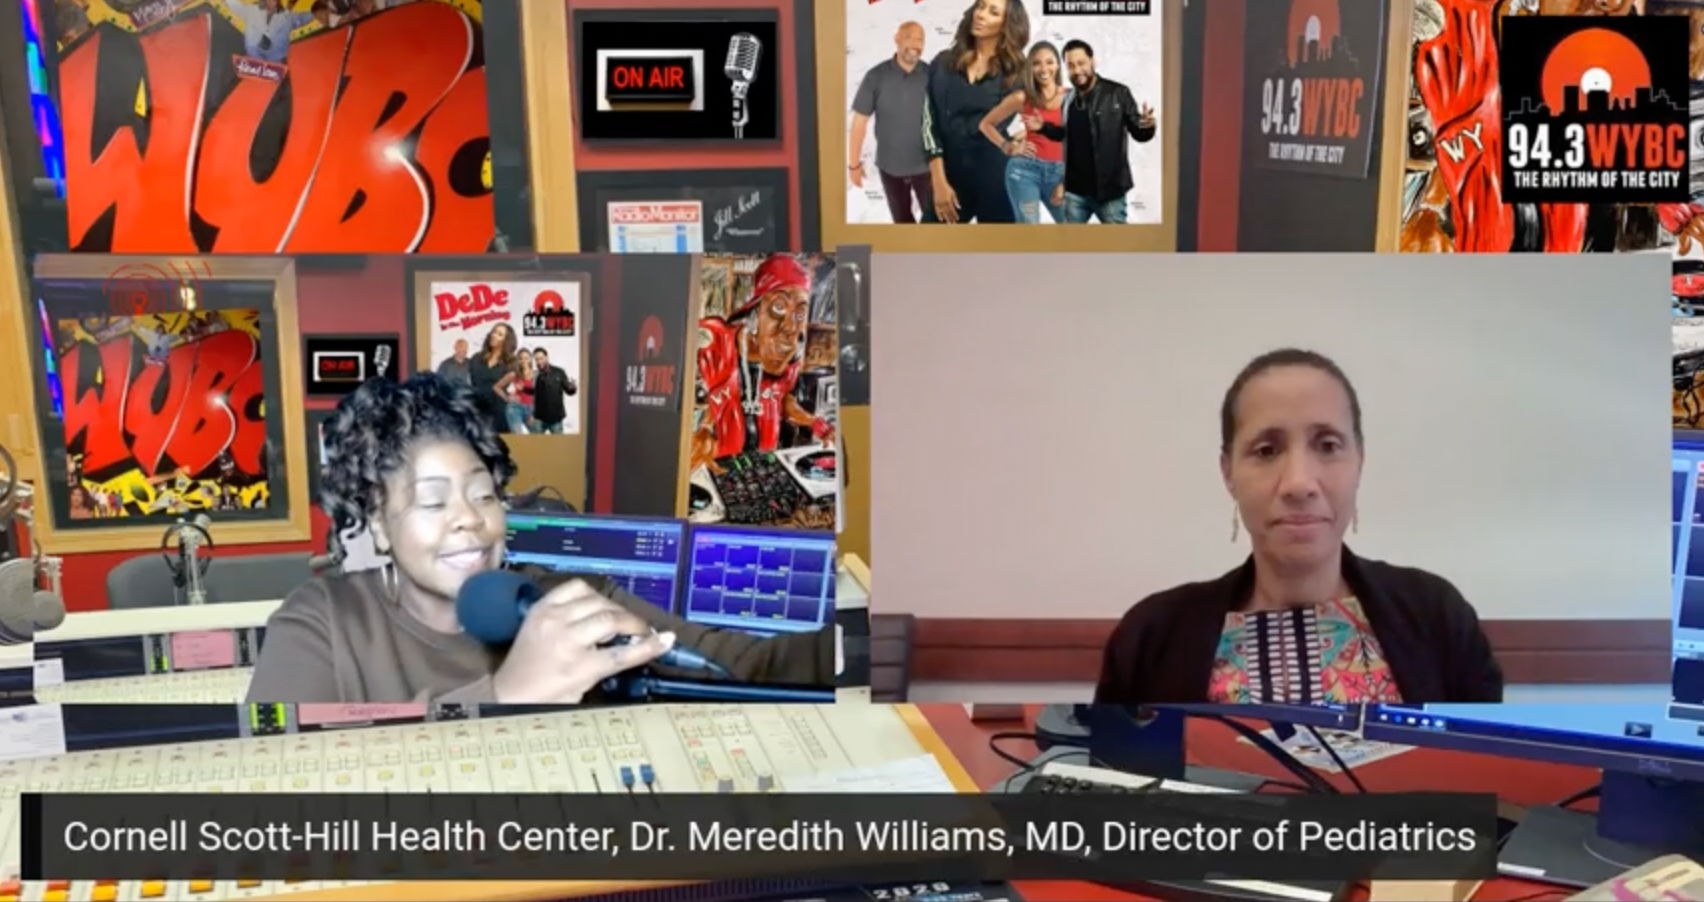 CSHHC's Dr. Meredith Williams Discusses COVID-19 on WYBC